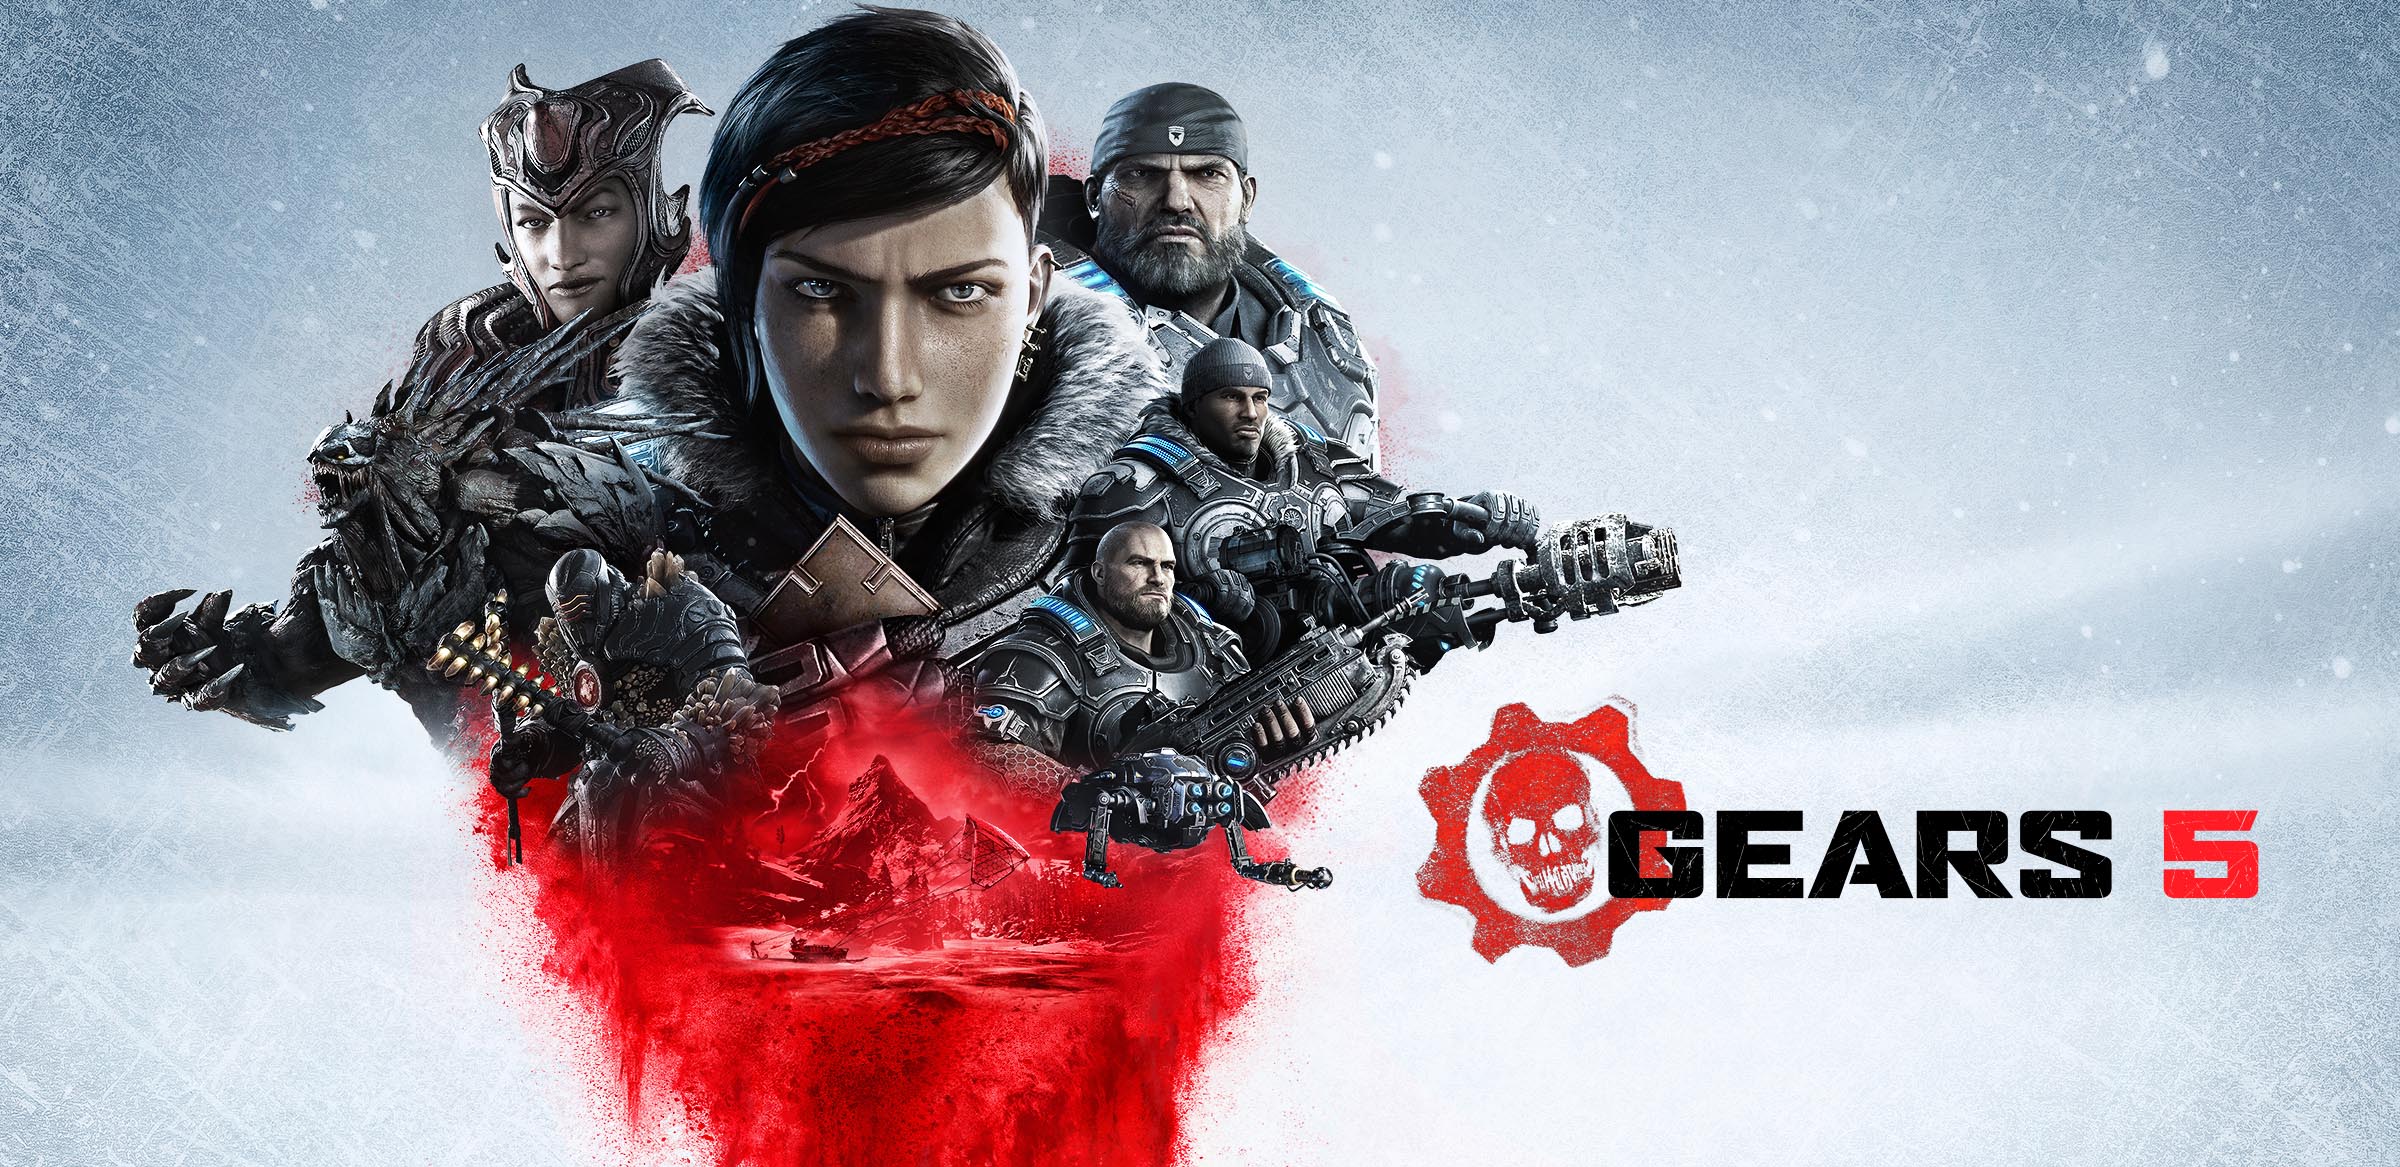 Gears 5 characters and logo